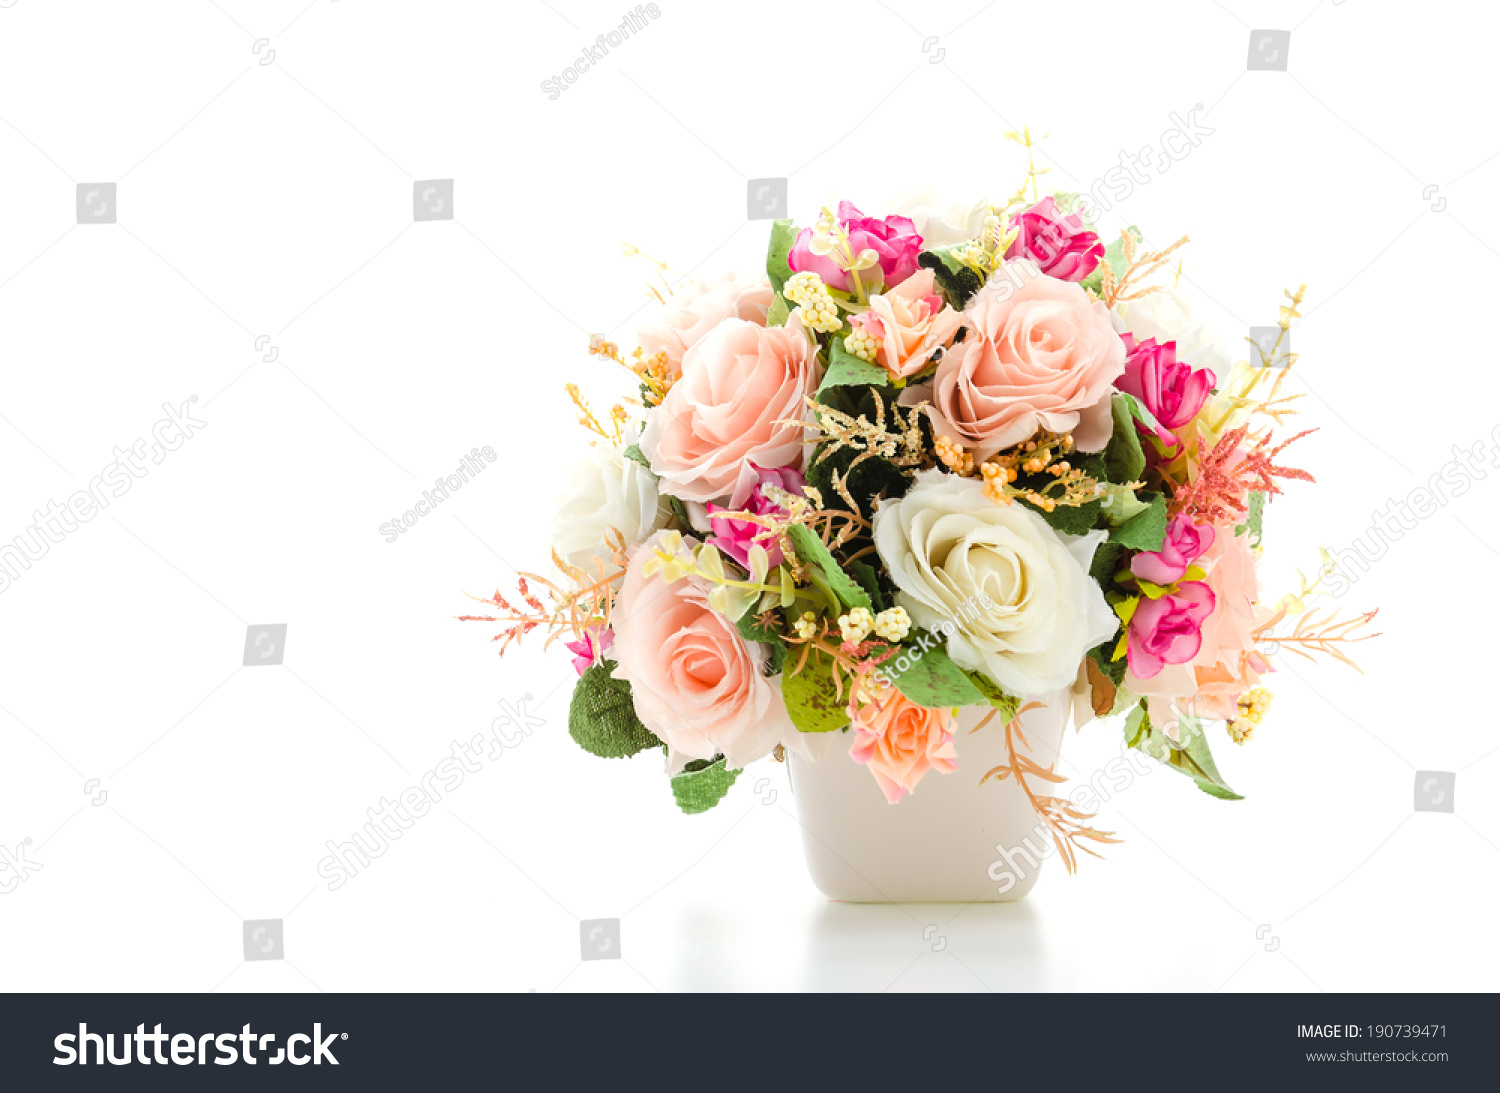 Bouquet flowers isolated on white #190739471